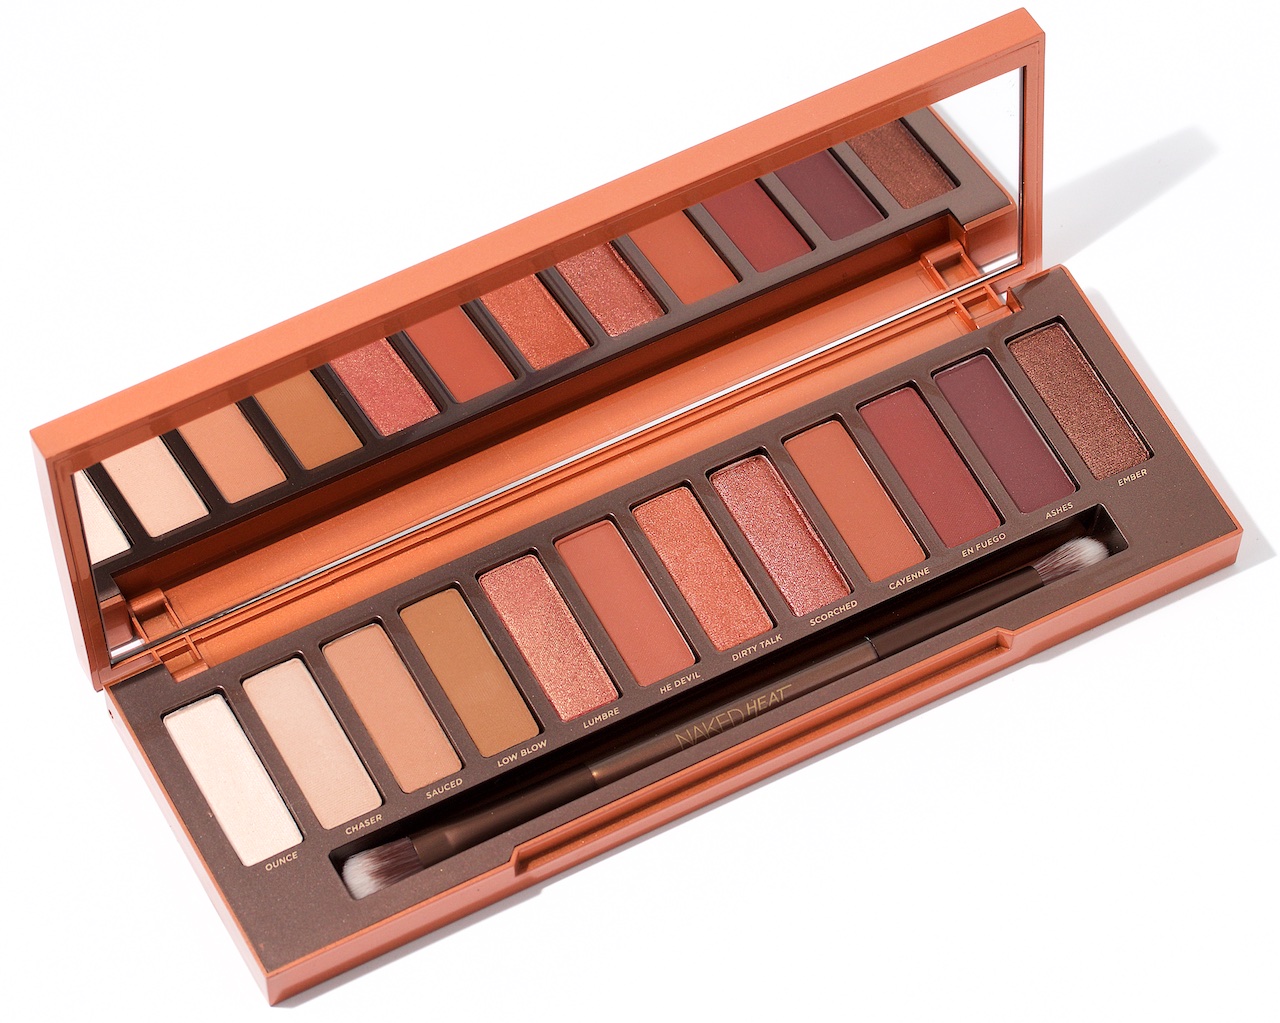 Urban Decay Naked Heat Palette Review And Swatches - When 